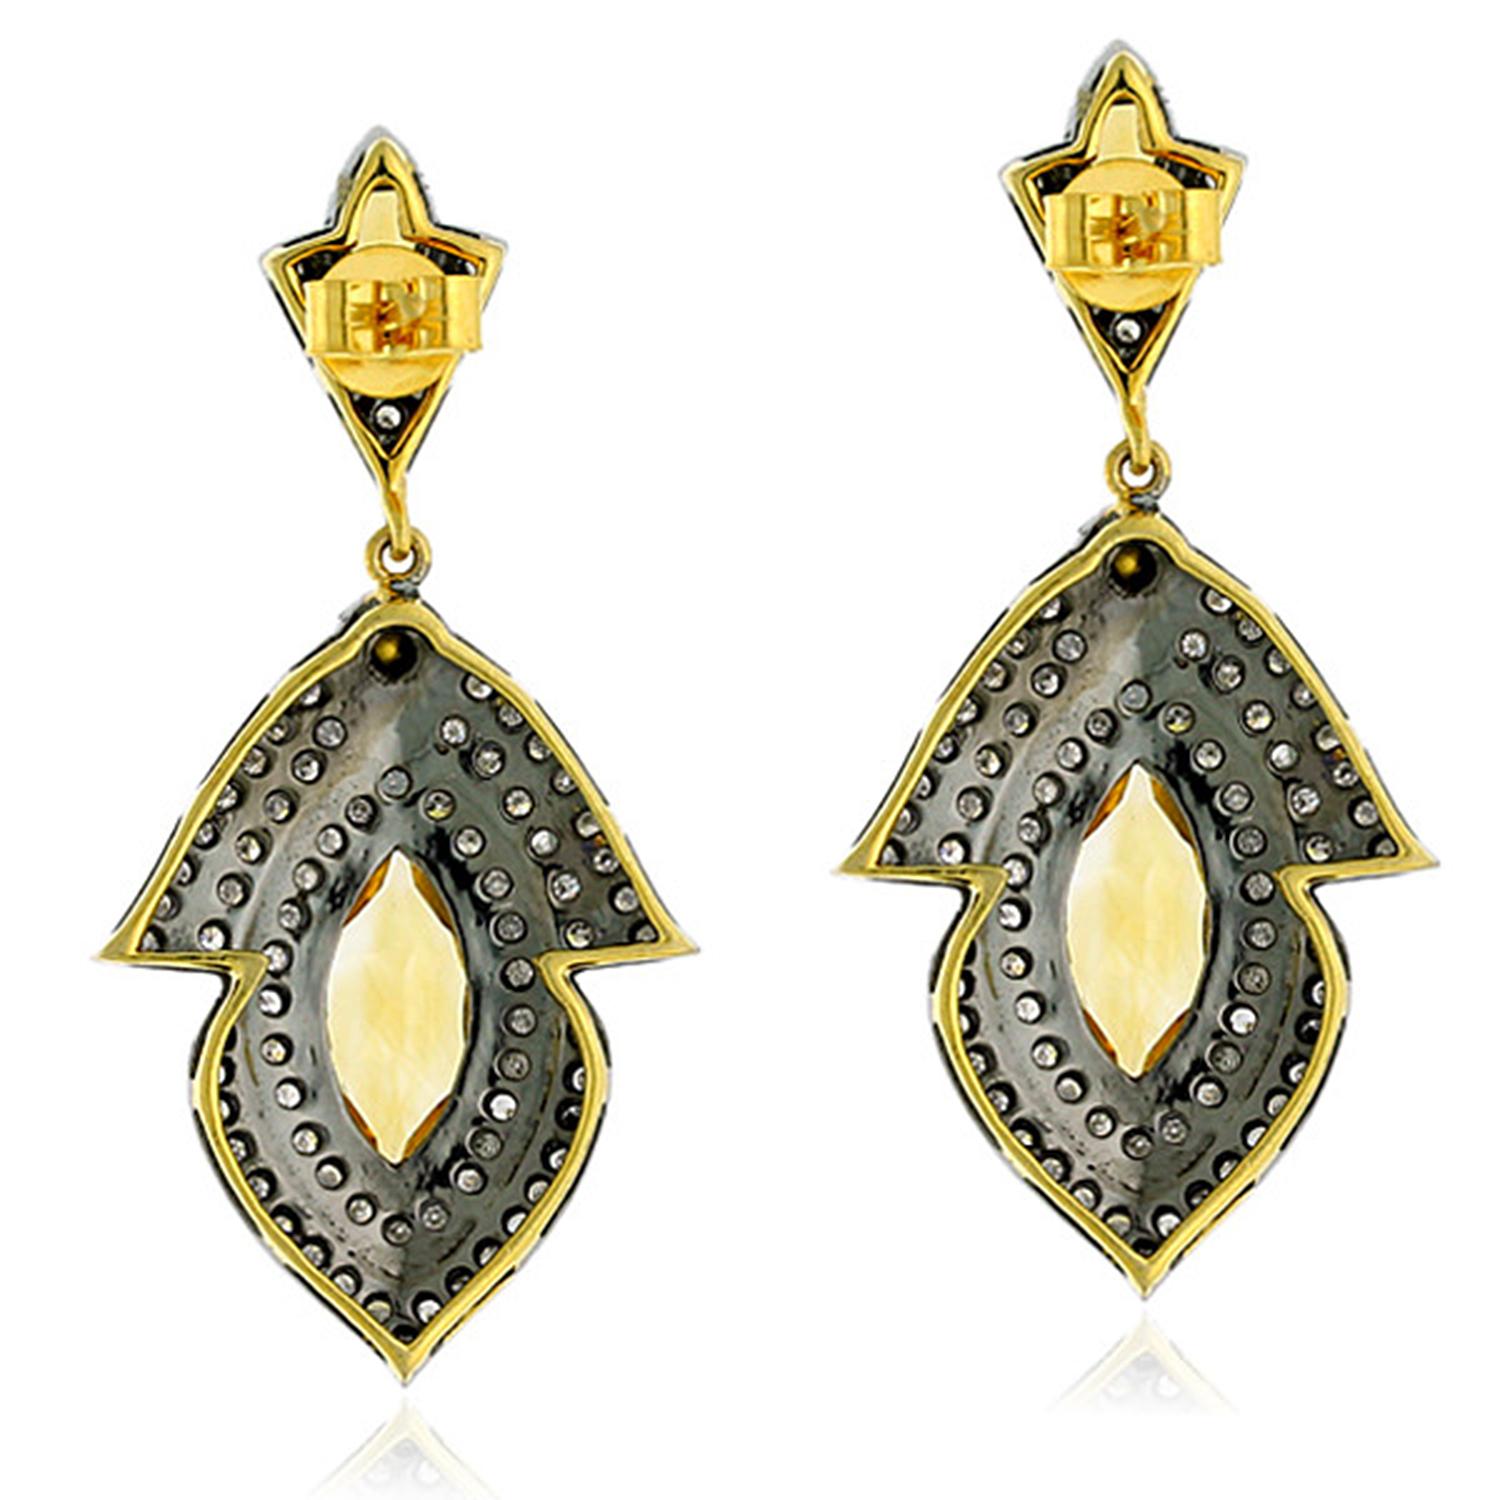 Sunshine Citrine and Diamond drop Earring in silver and 18K Gold is perfect for summers.

Closure; Push Post

18kt Gold: 3.29gms
Diamond: 2.41cts
Silver: 8.92gms
Citrine: 4.19cts
